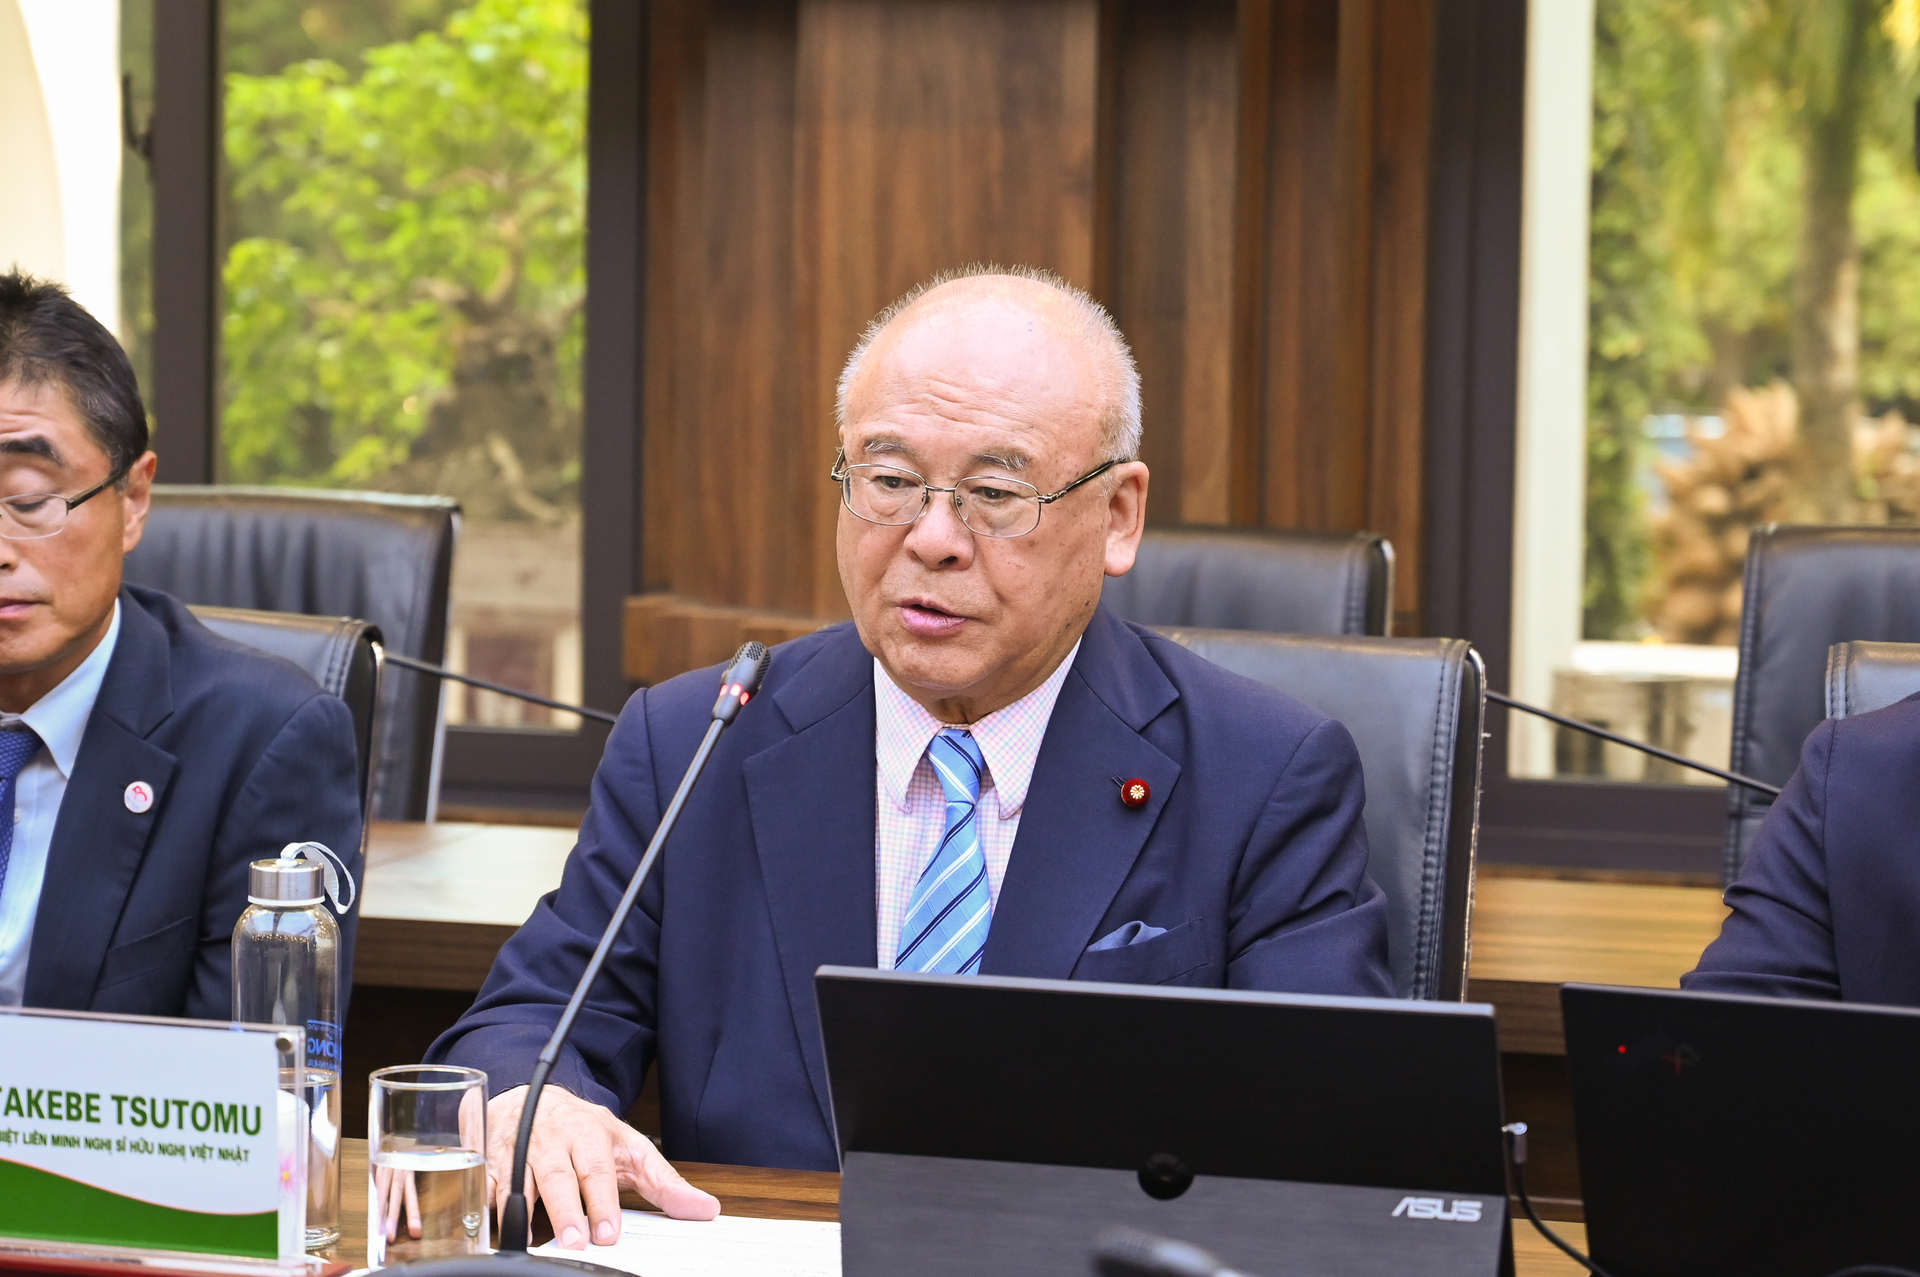 Mr. Tsutomu Takebe, former Minister of Agriculture, Forestry and Fisheries of Japan. Photo: Quynh Chi.